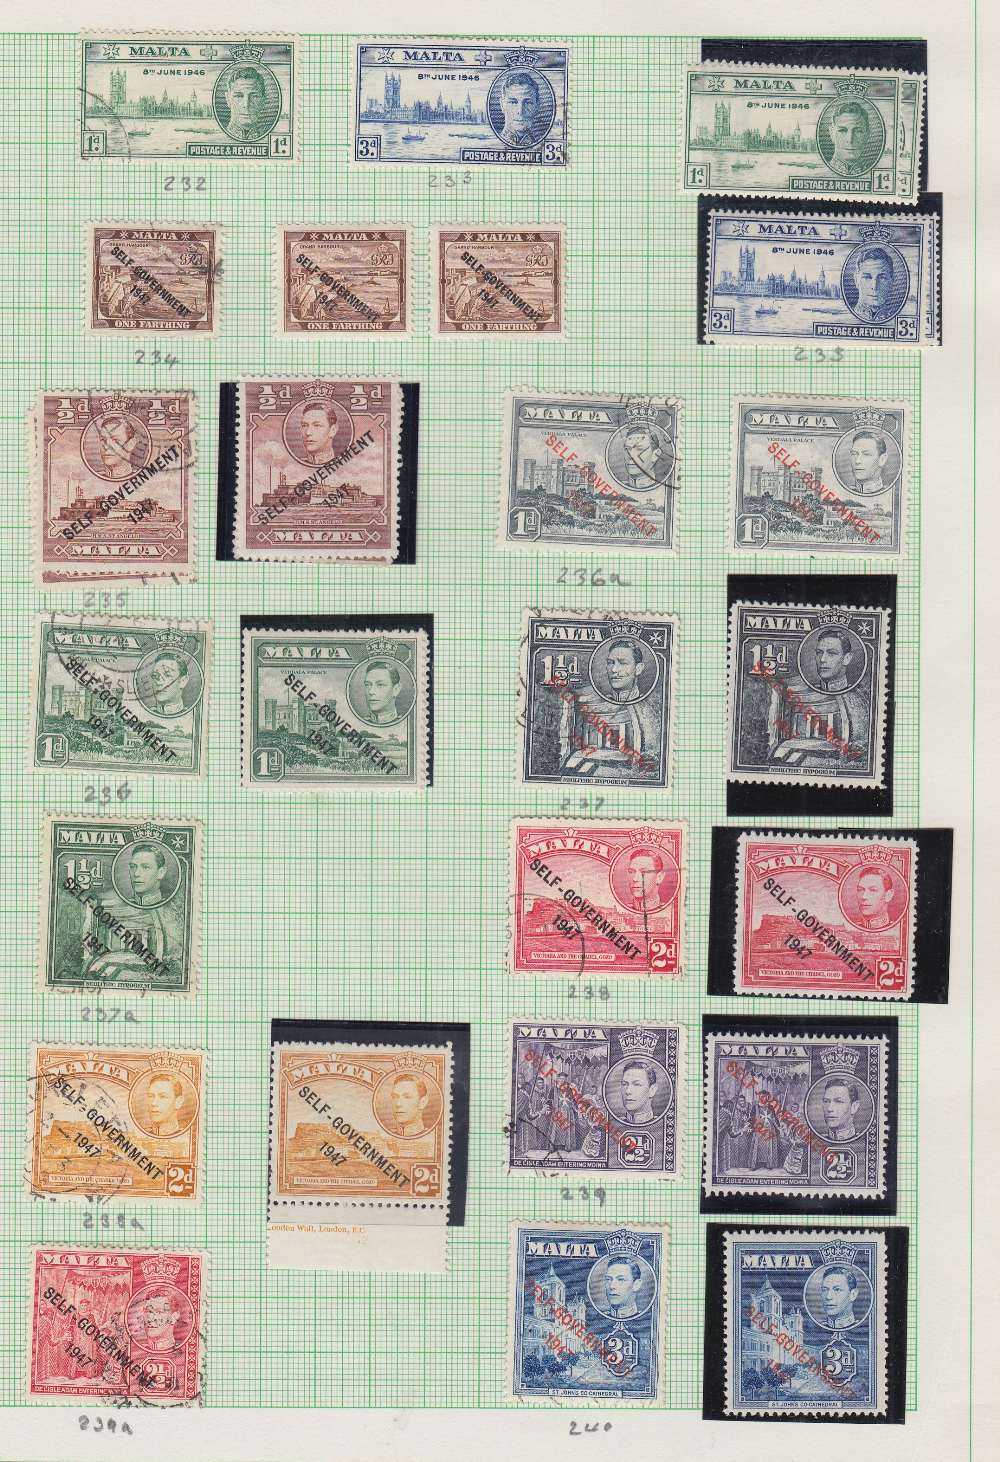 STAMSP MALTA Collection in album, also on a few stockcards. - Image 3 of 3